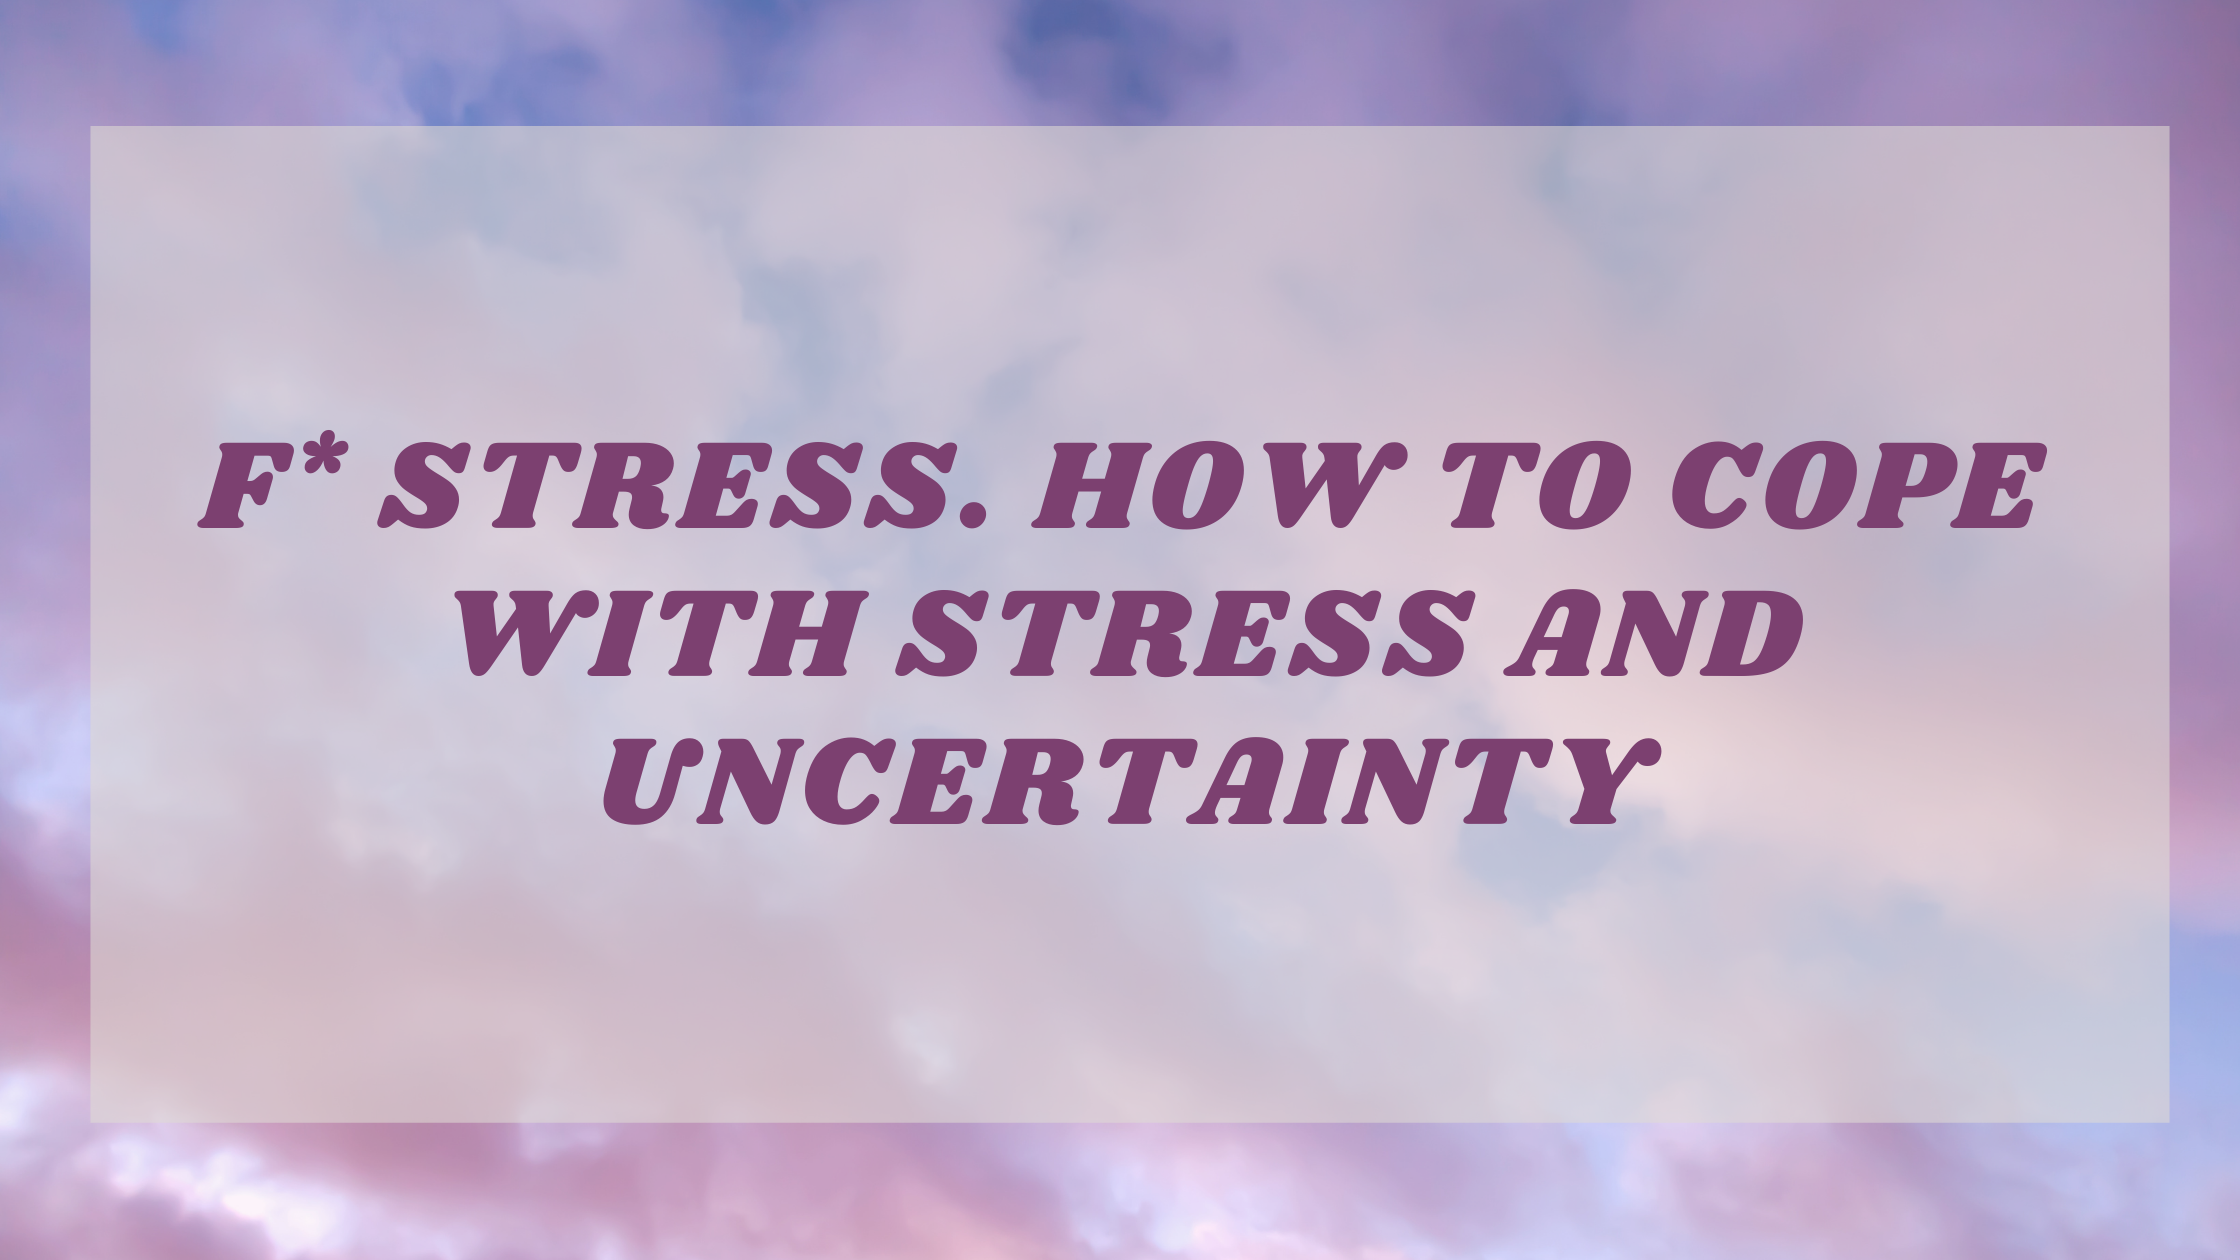 Is a Great Way to Cope With Uncertainty